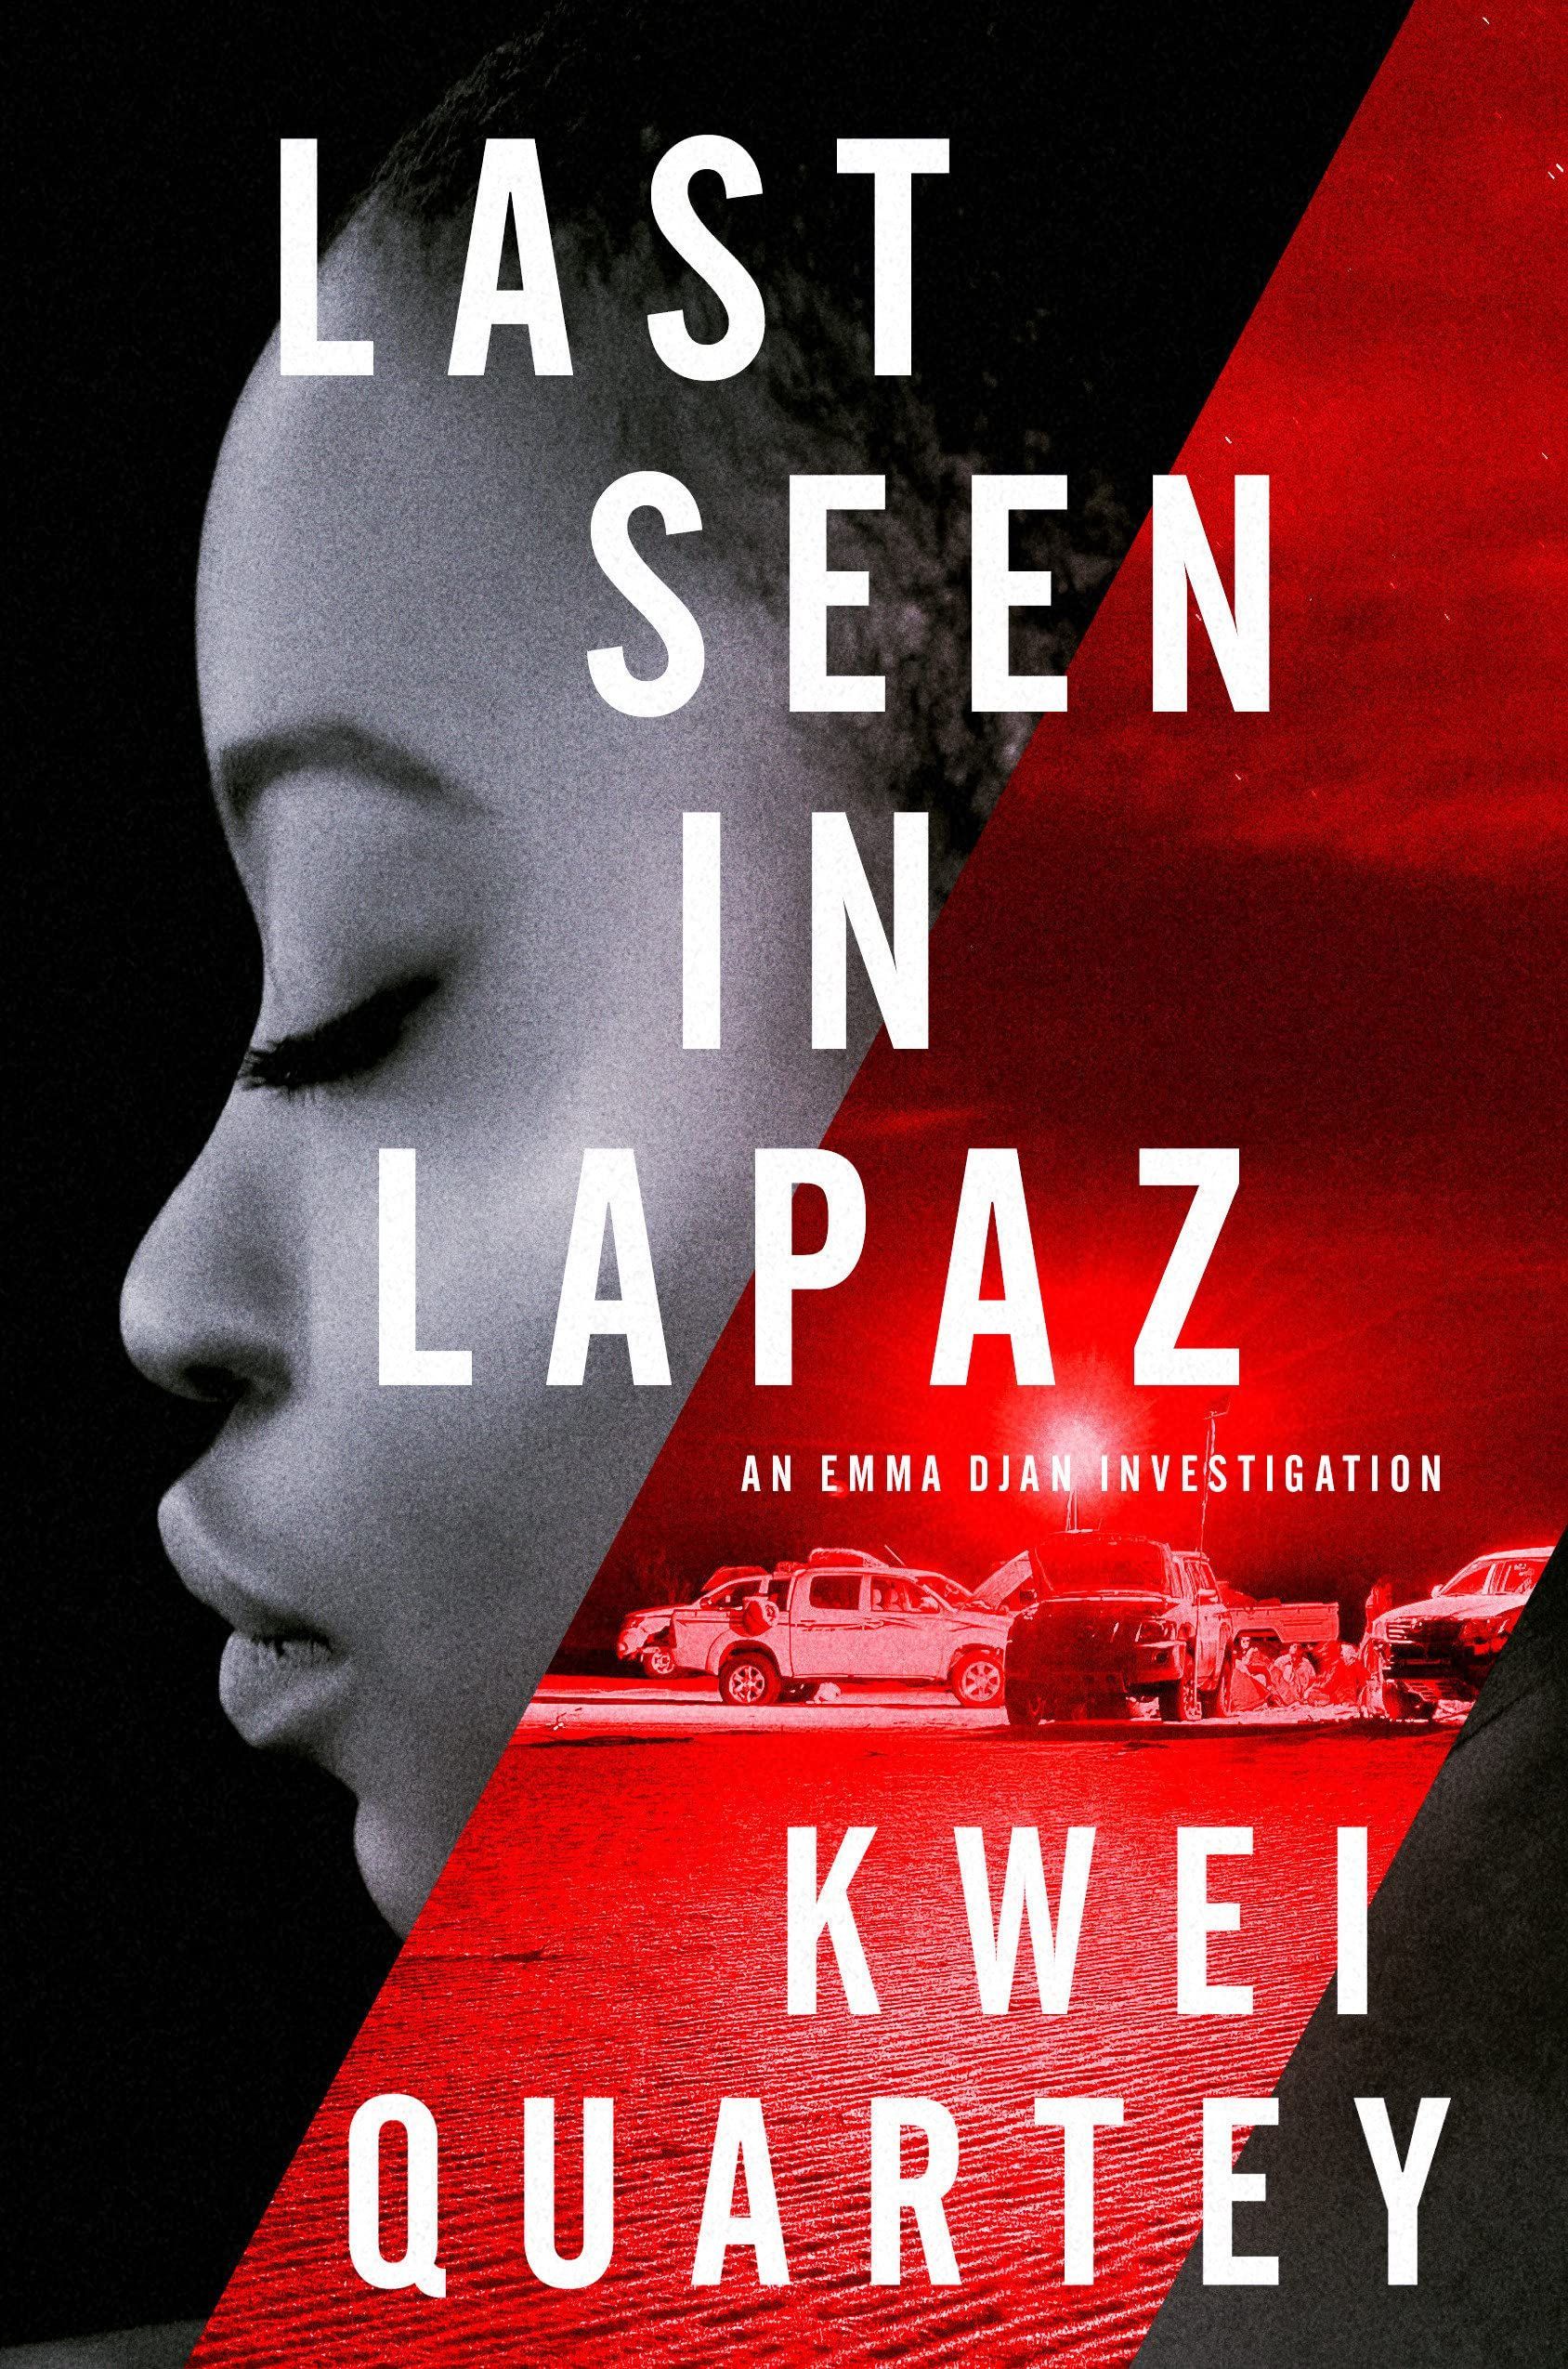 Messy World, Missing Woman: On Kwei Quartey’s “Last Seen in Lapaz”